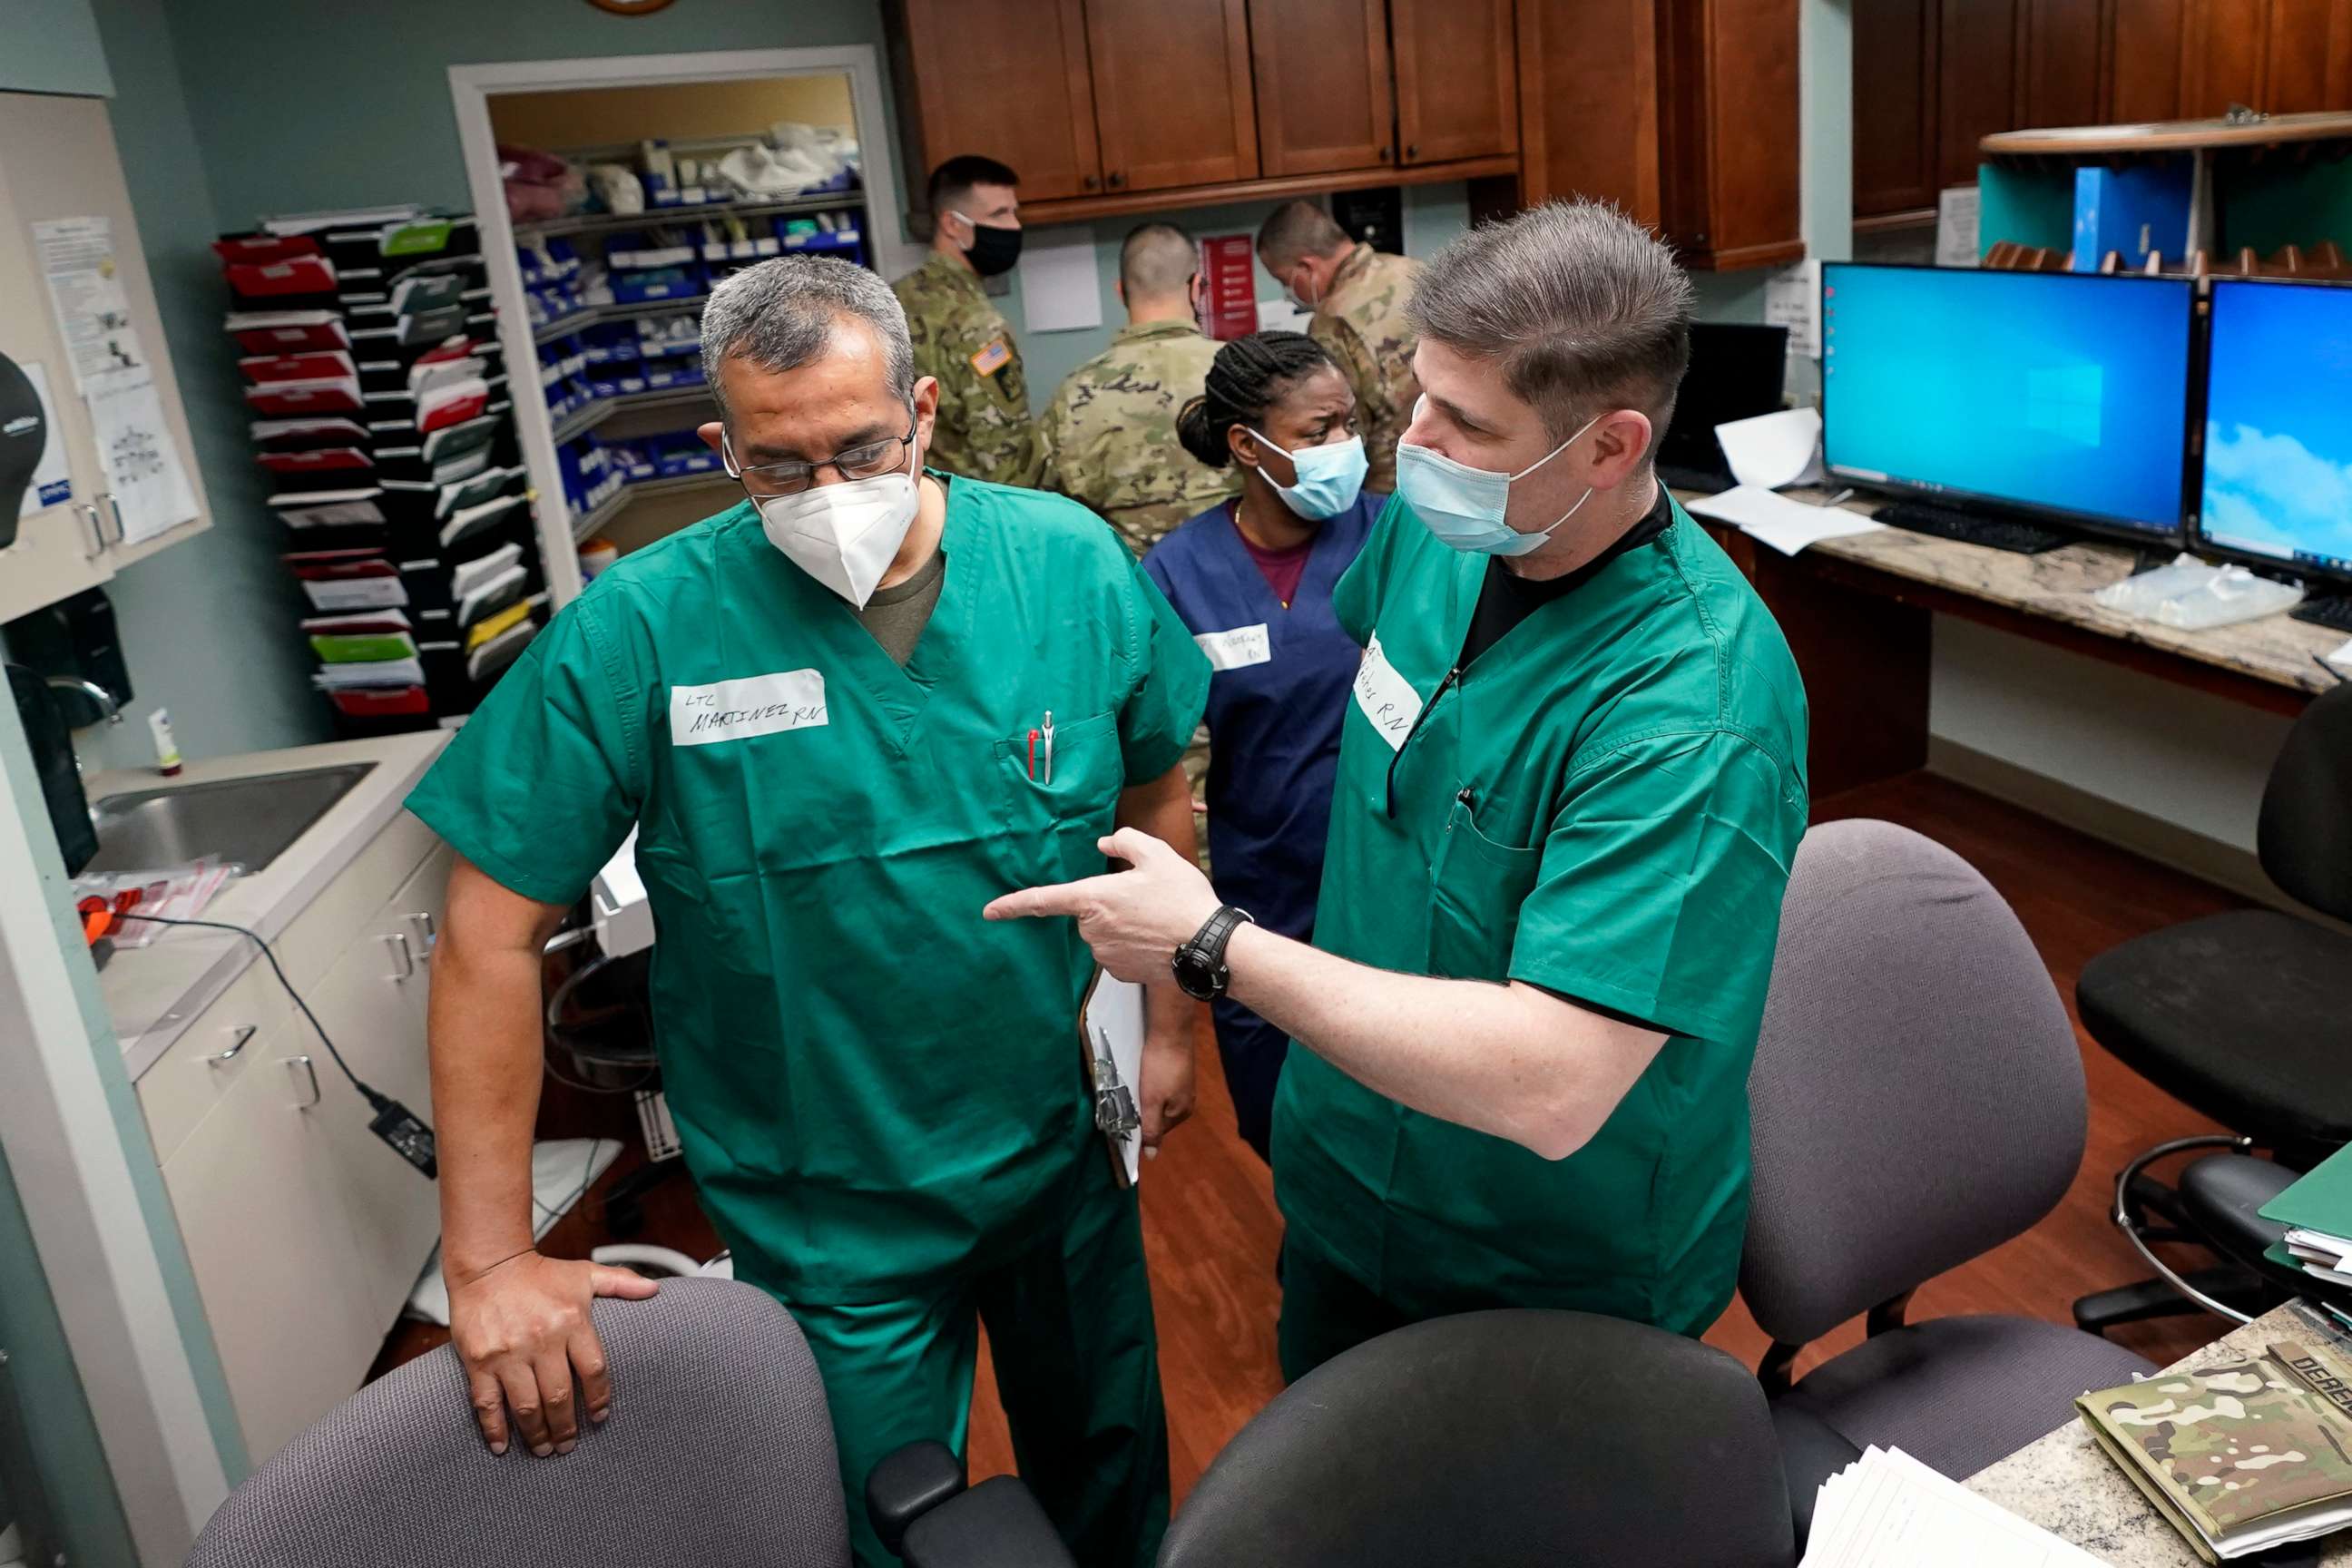 PHOTO: In this July 16, 2020 photo, Registered nurses Army Lt. Col. Oswaldo Martinez, left, and Maj. Andrew Wieher, right, with the Urban Augmentation Medical Task Force, work to setup a nurses station in Houston.